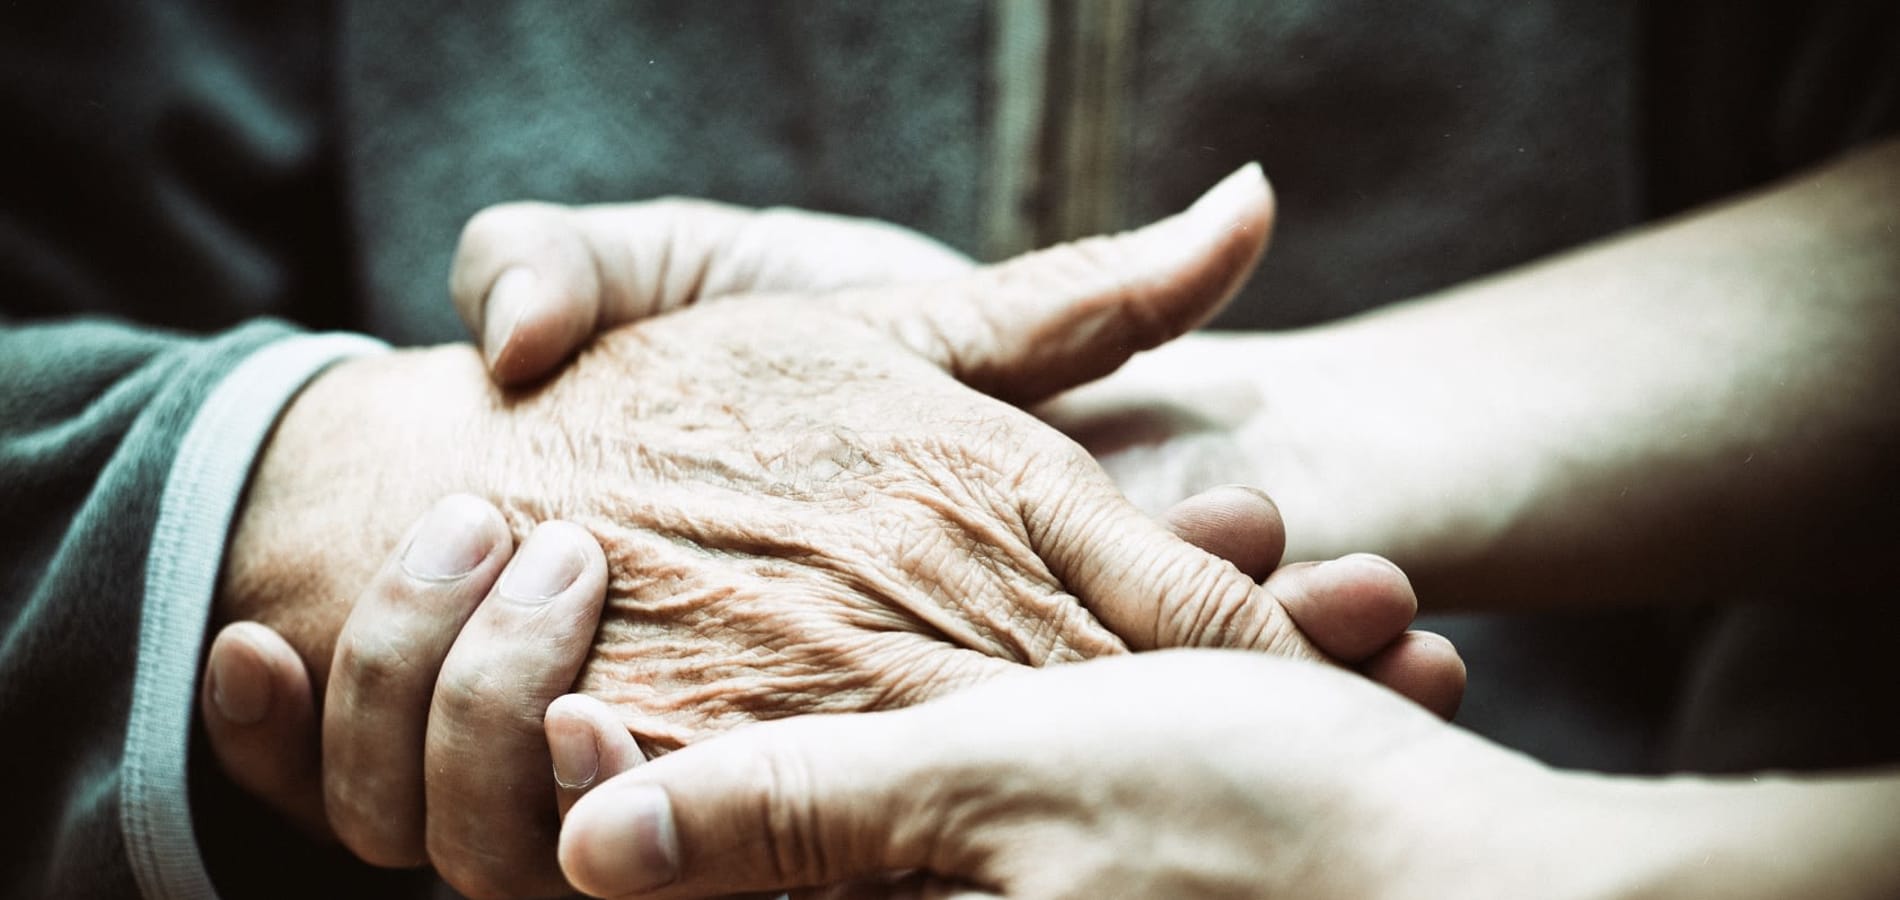 Caregiving, dementia and incontinence: an open online course